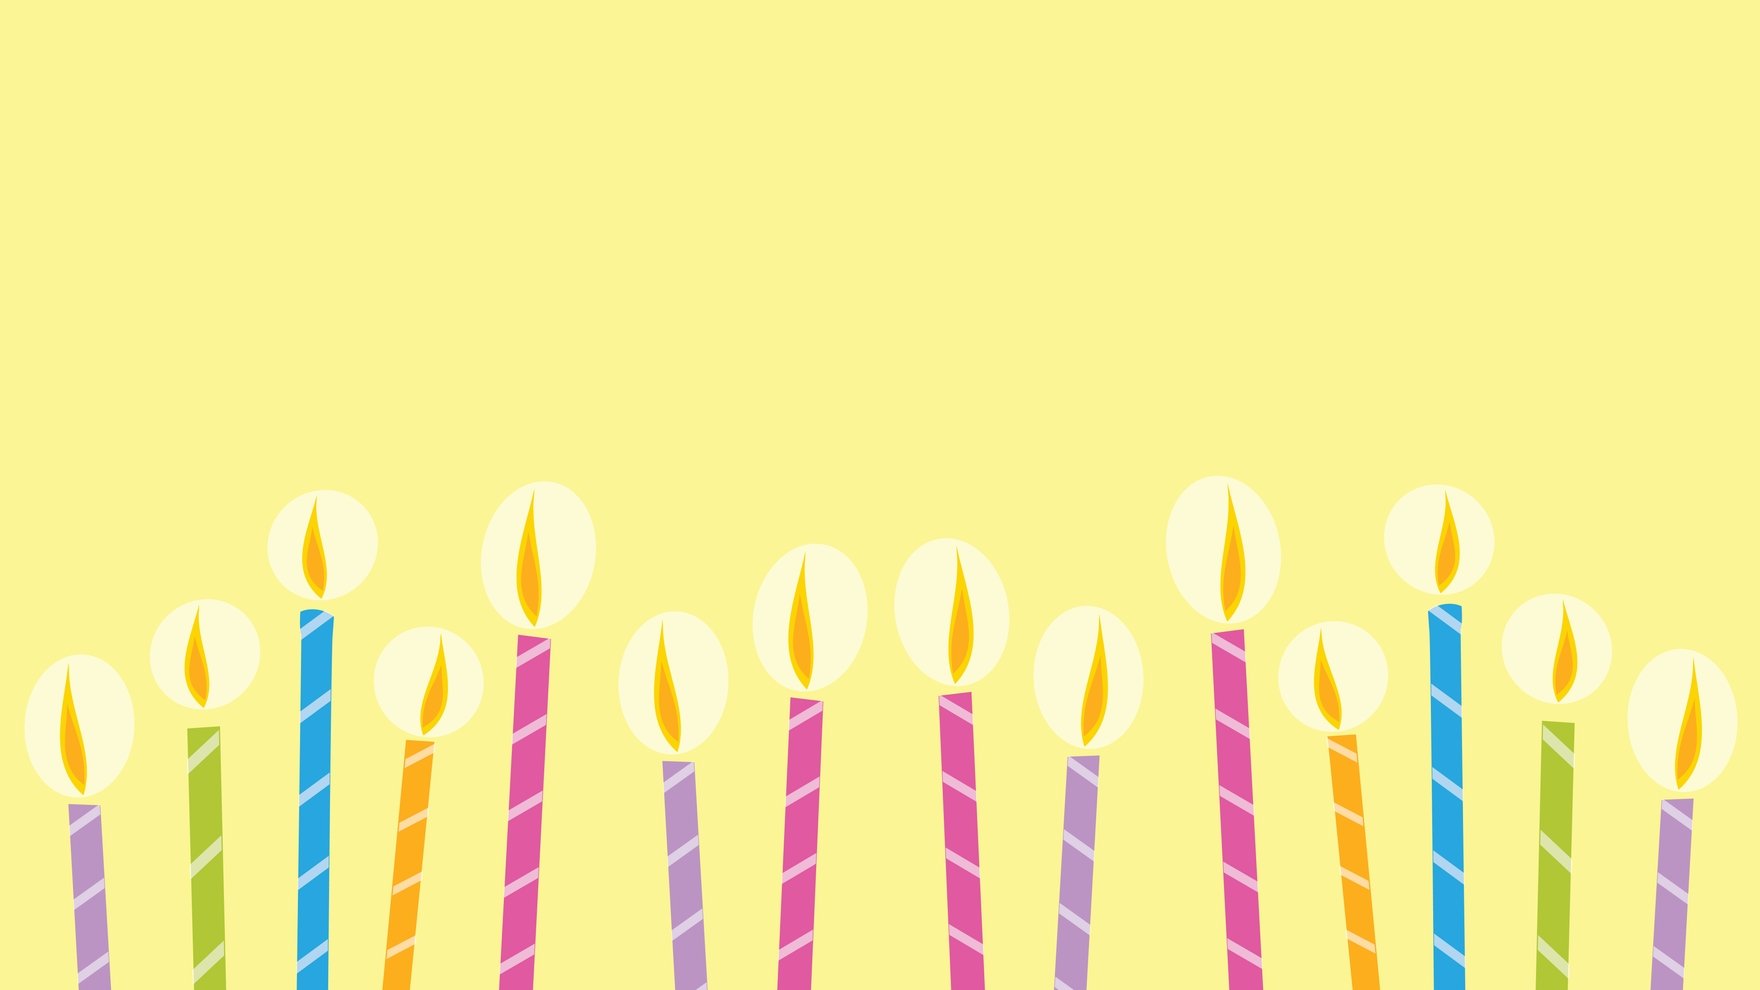 Free Birthday Candle Background in Illustrator, EPS, SVG, JPG, PNG